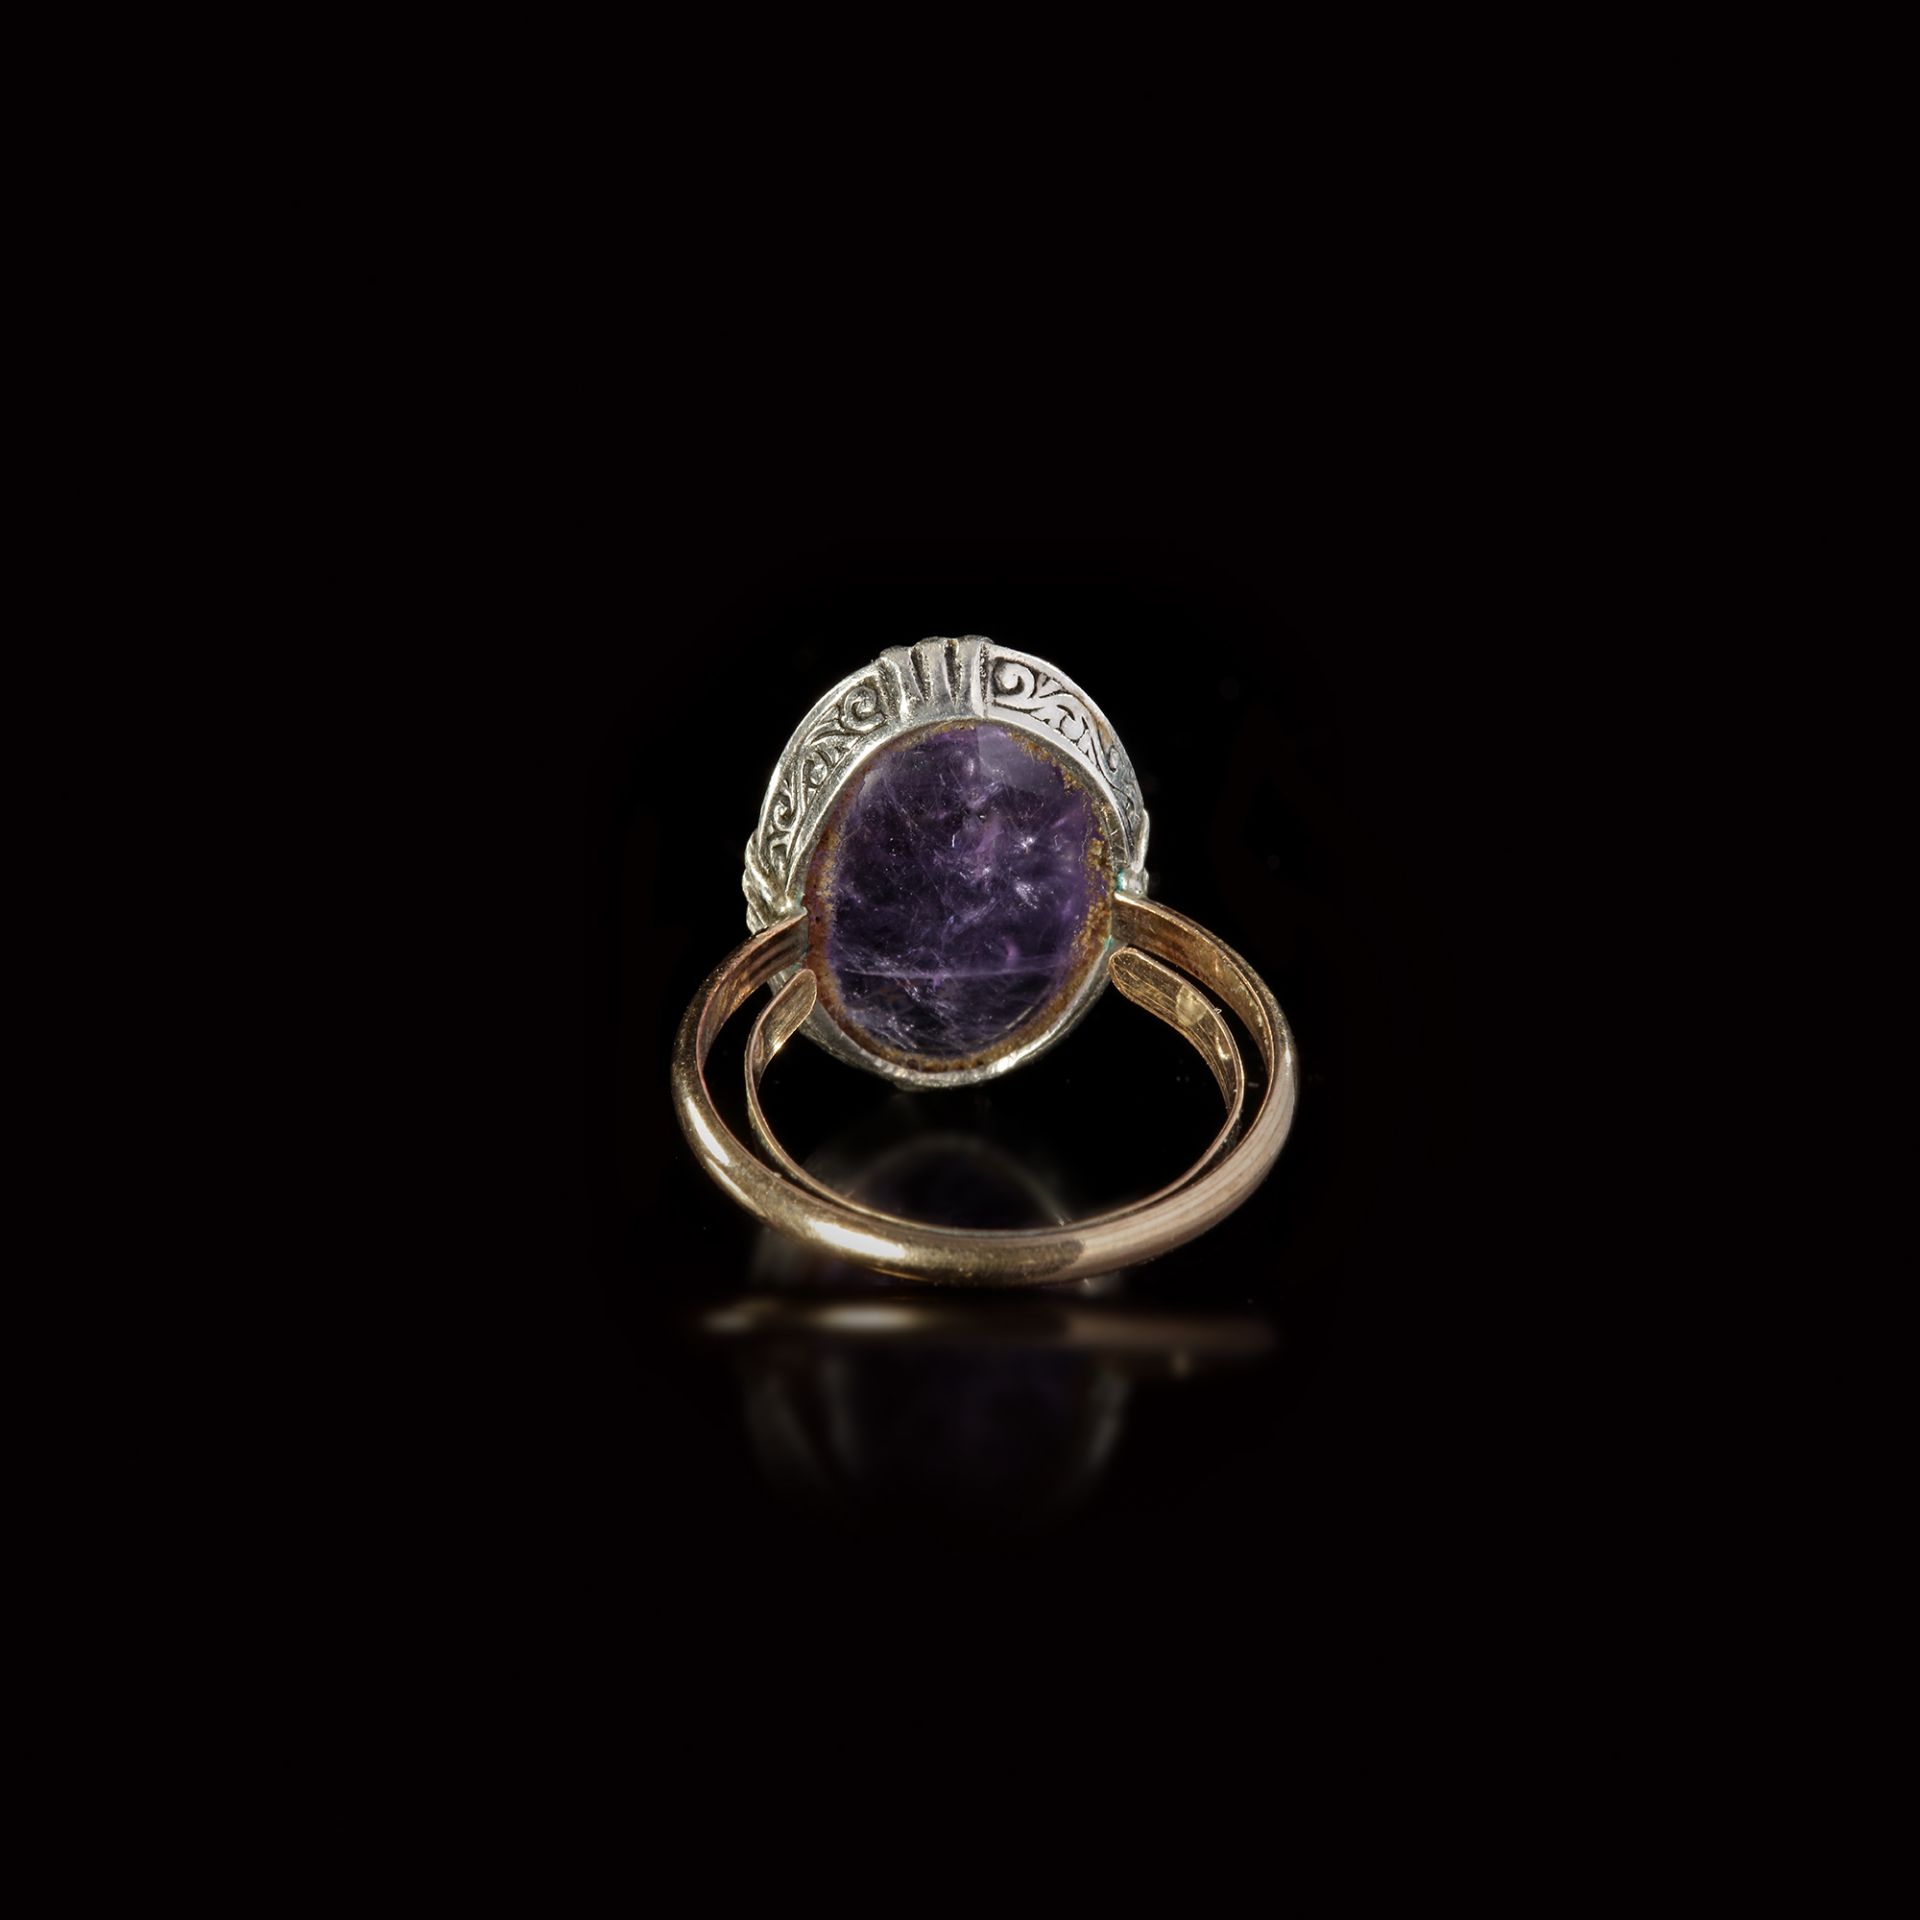 AN ANTIQUE RING WITH A ROMAN AMETHYST INTAGLIO, 1ST CENTURY AD, 18TH CENTURY RING - Image 2 of 7